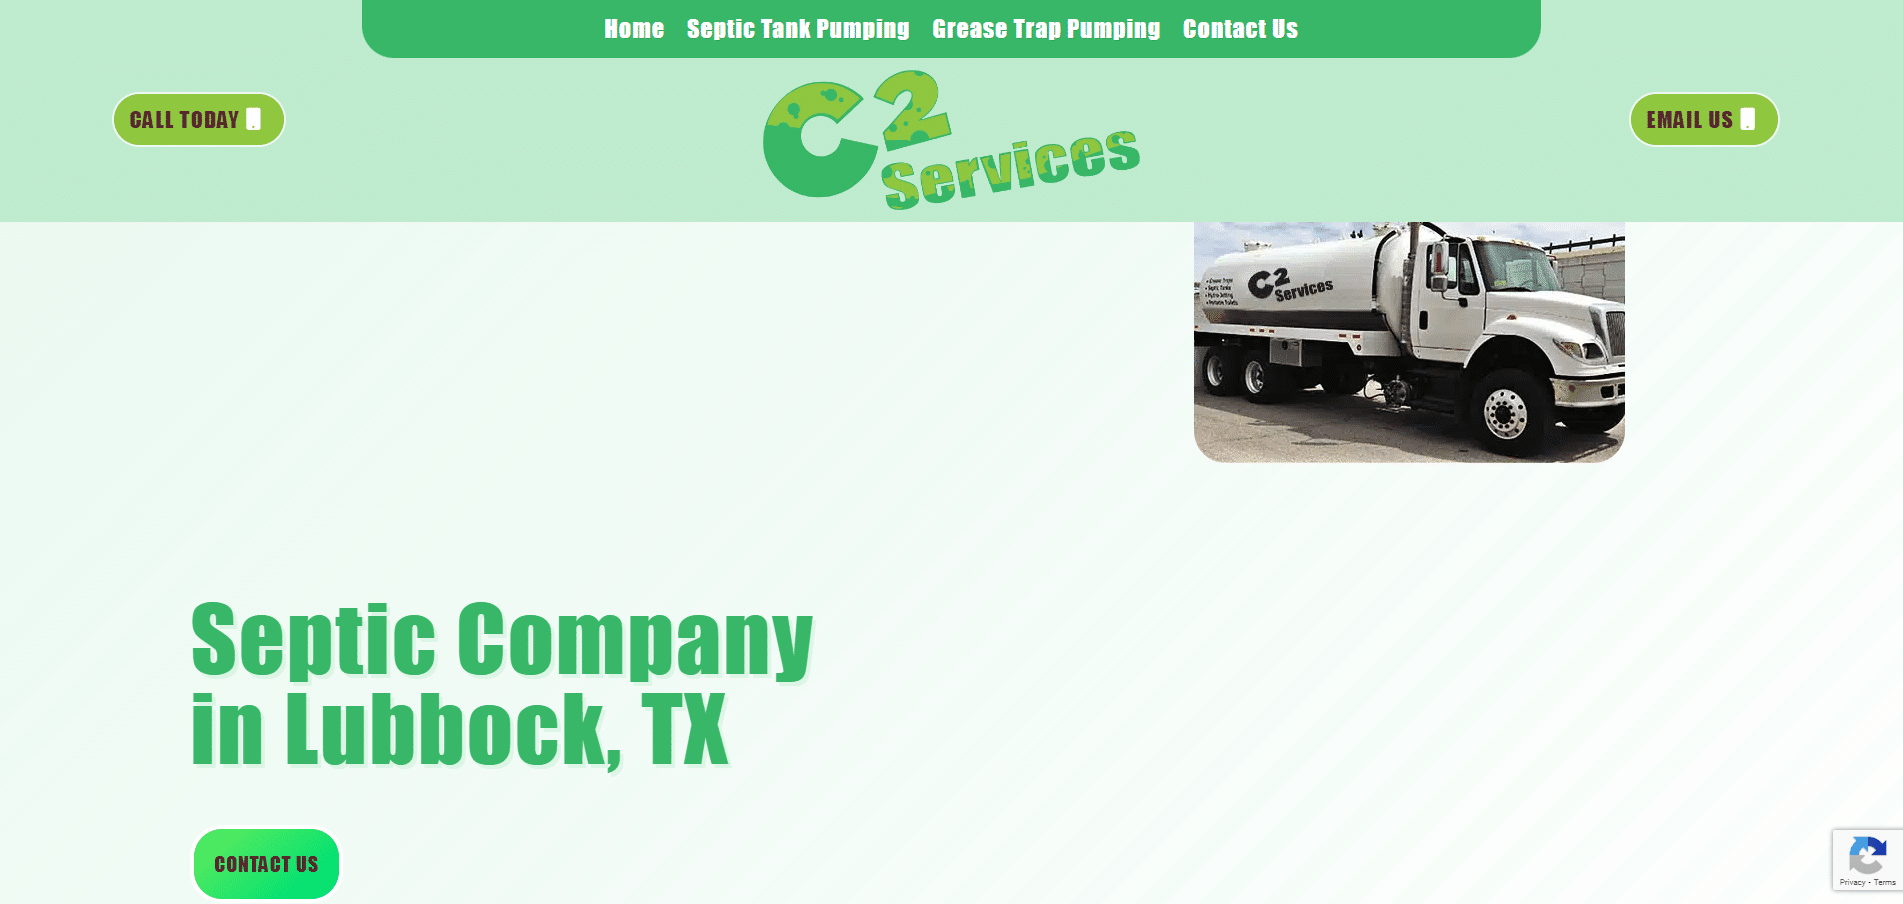 Septic Company in Lubbock